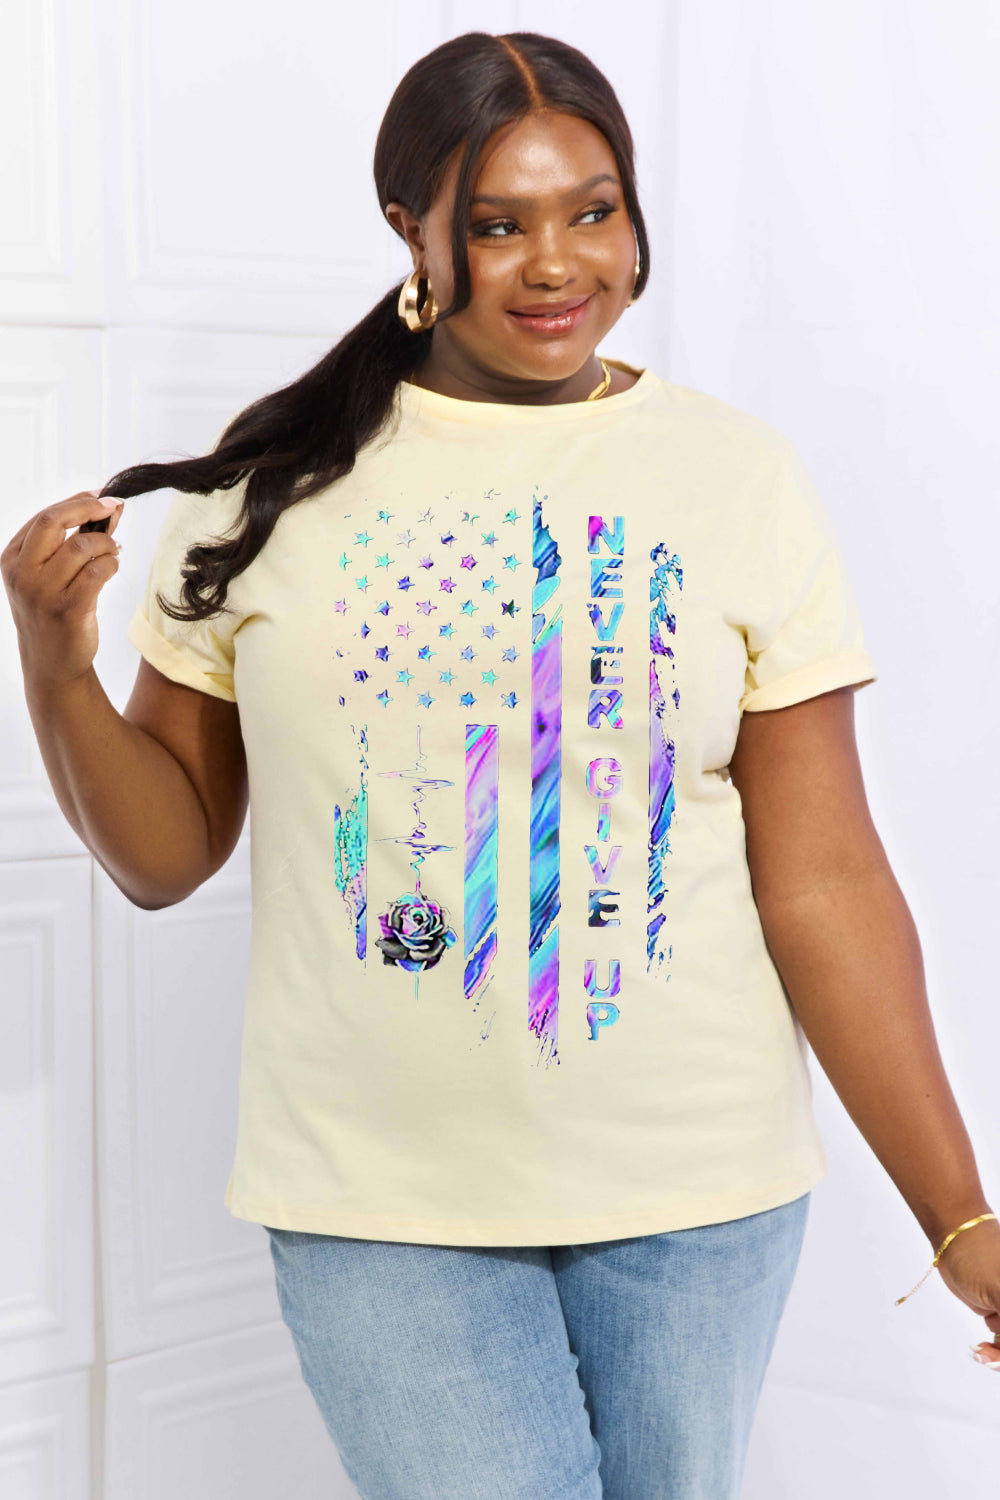 NEVER GIVE UP Graphic Cotton Tee - T-Shirts - Shirts & Tops - 8 - 2024